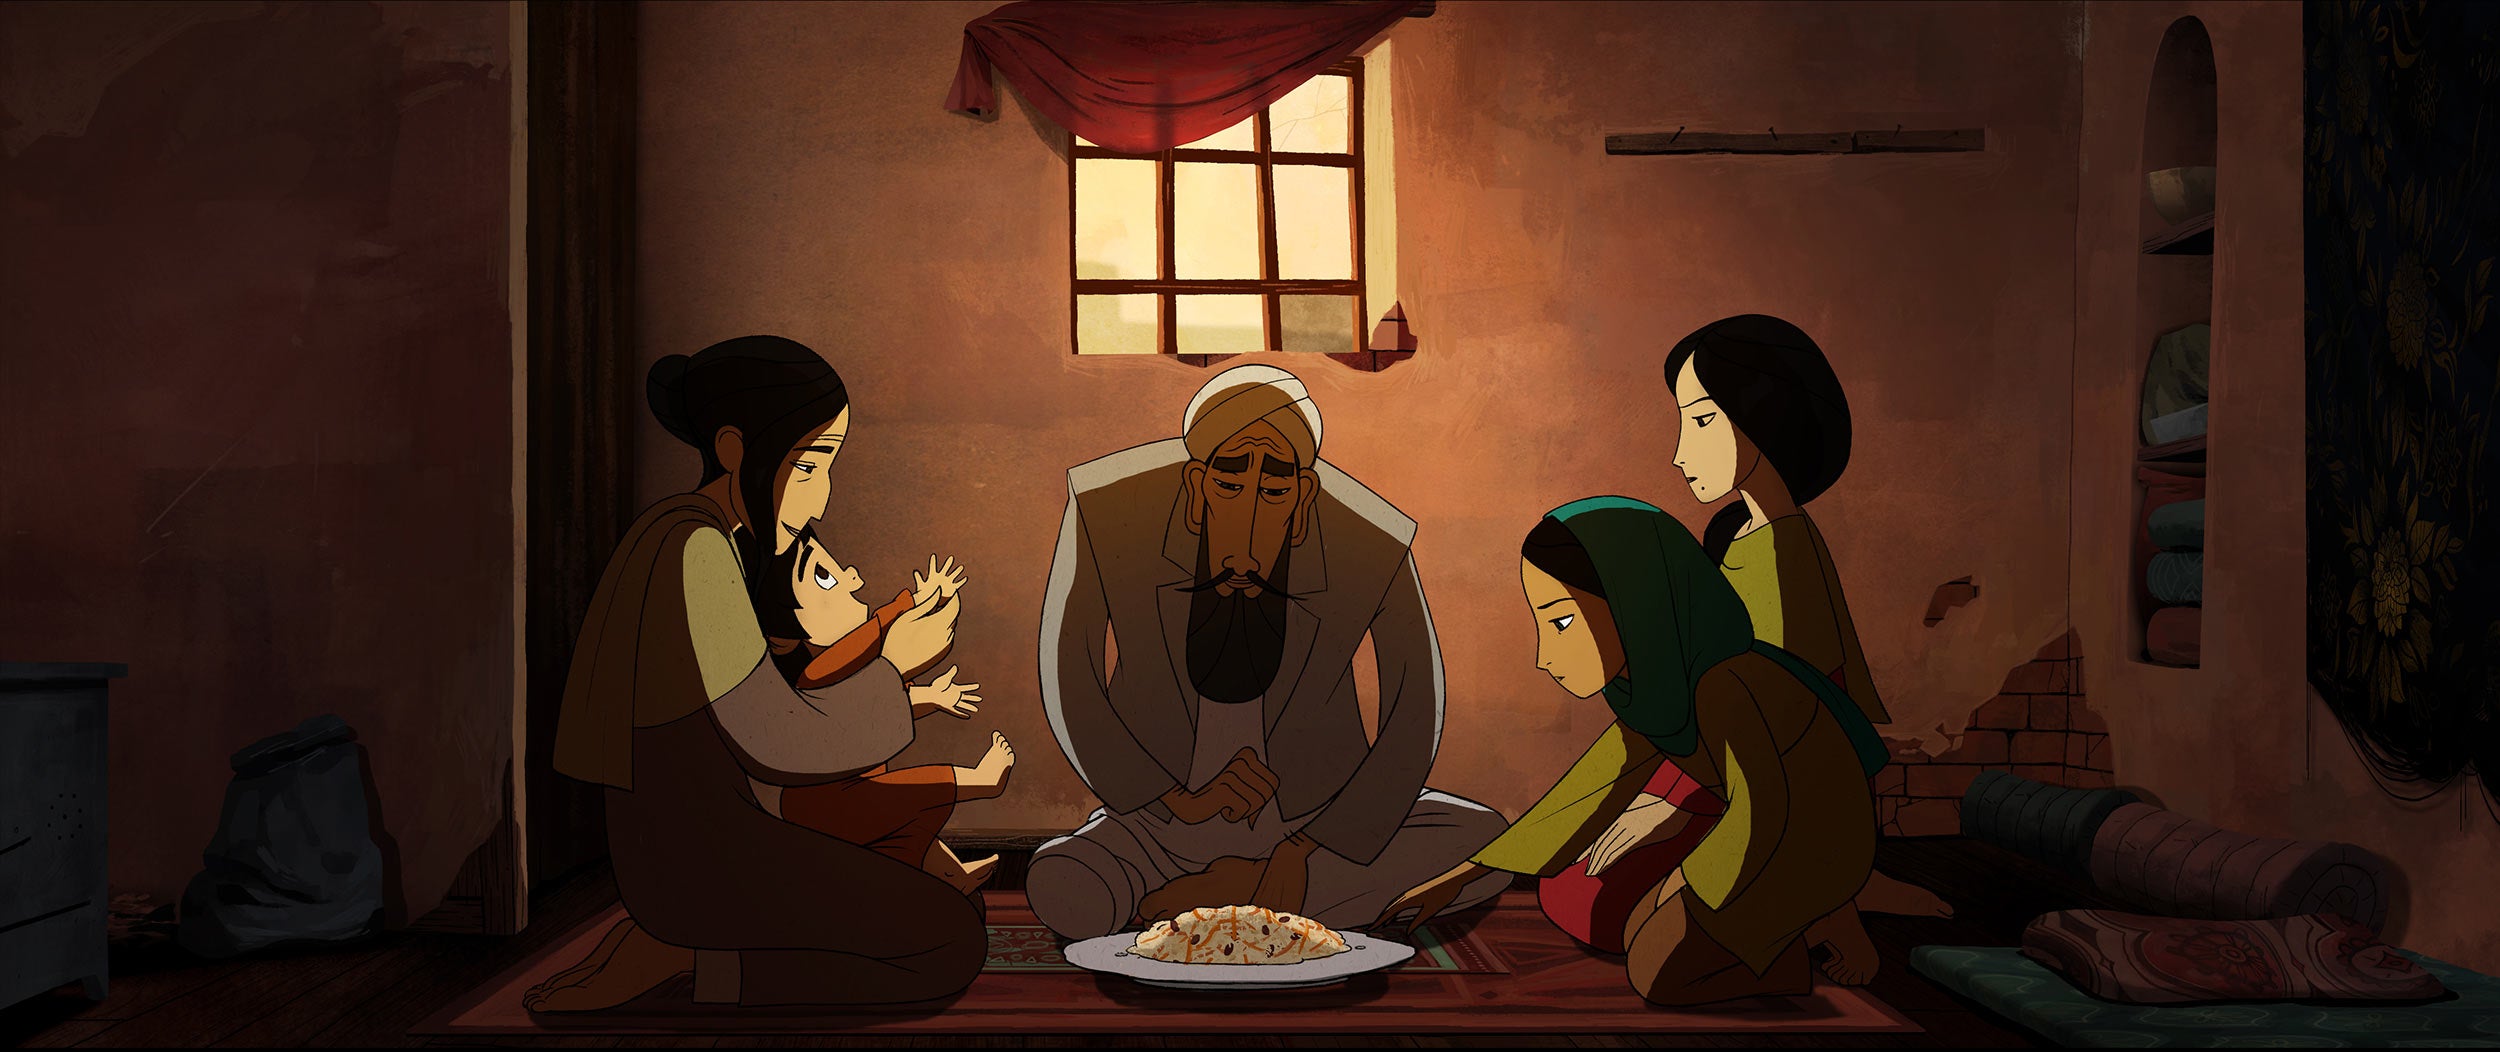 ‘The Breadwinner’ depicts family life in Afghanistan under the Taliban